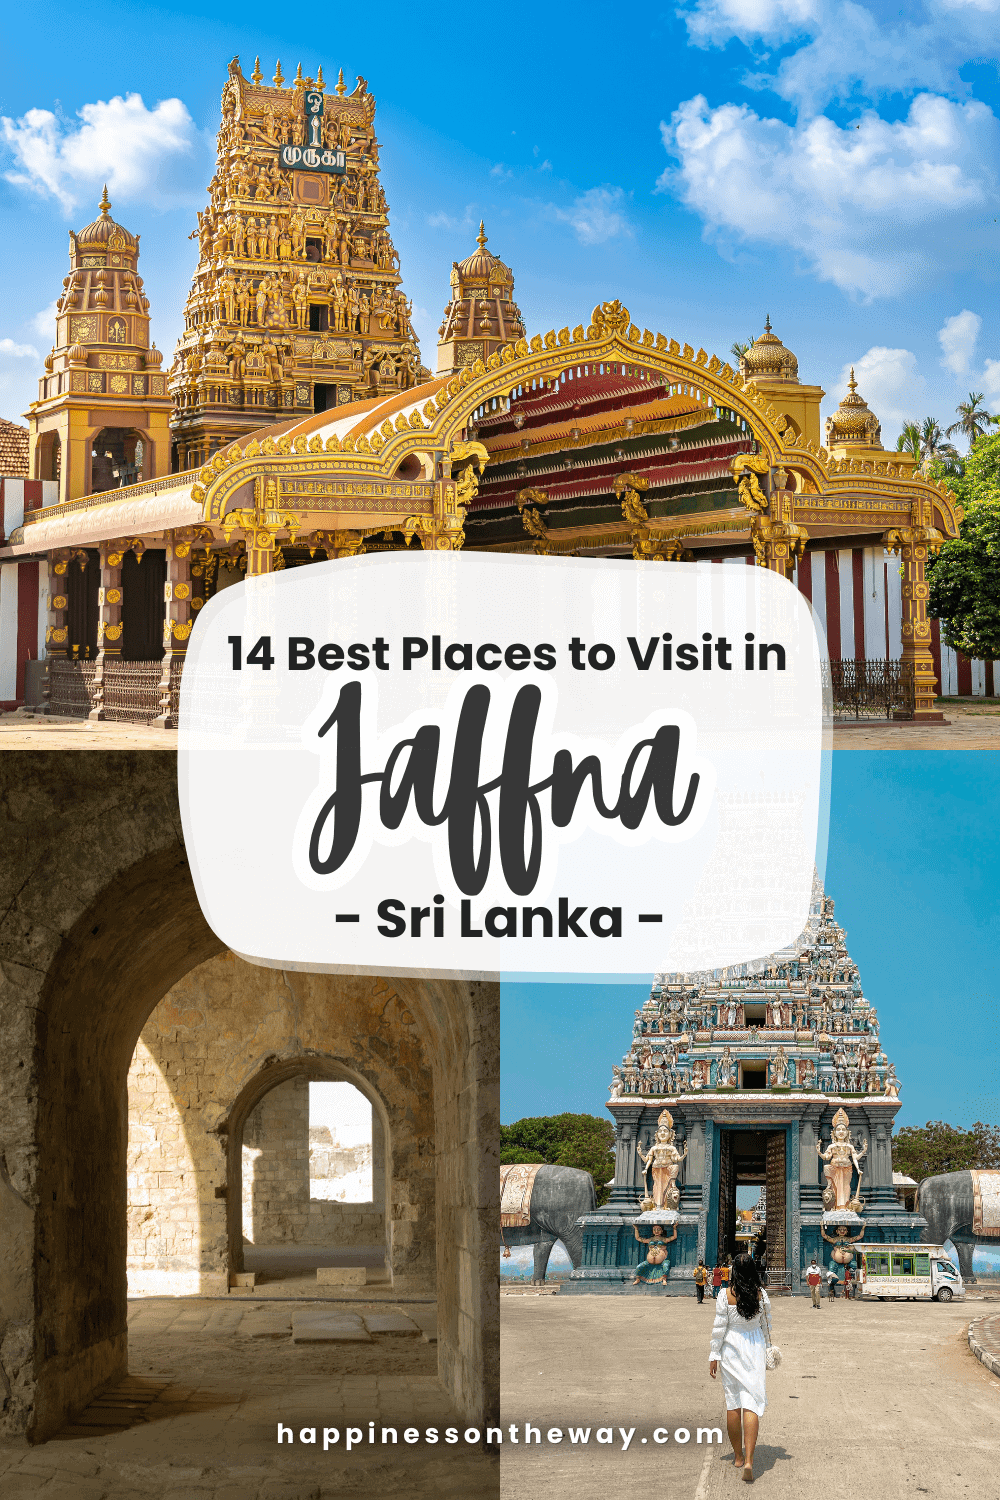 14 Best Places to Visit in Jaffna